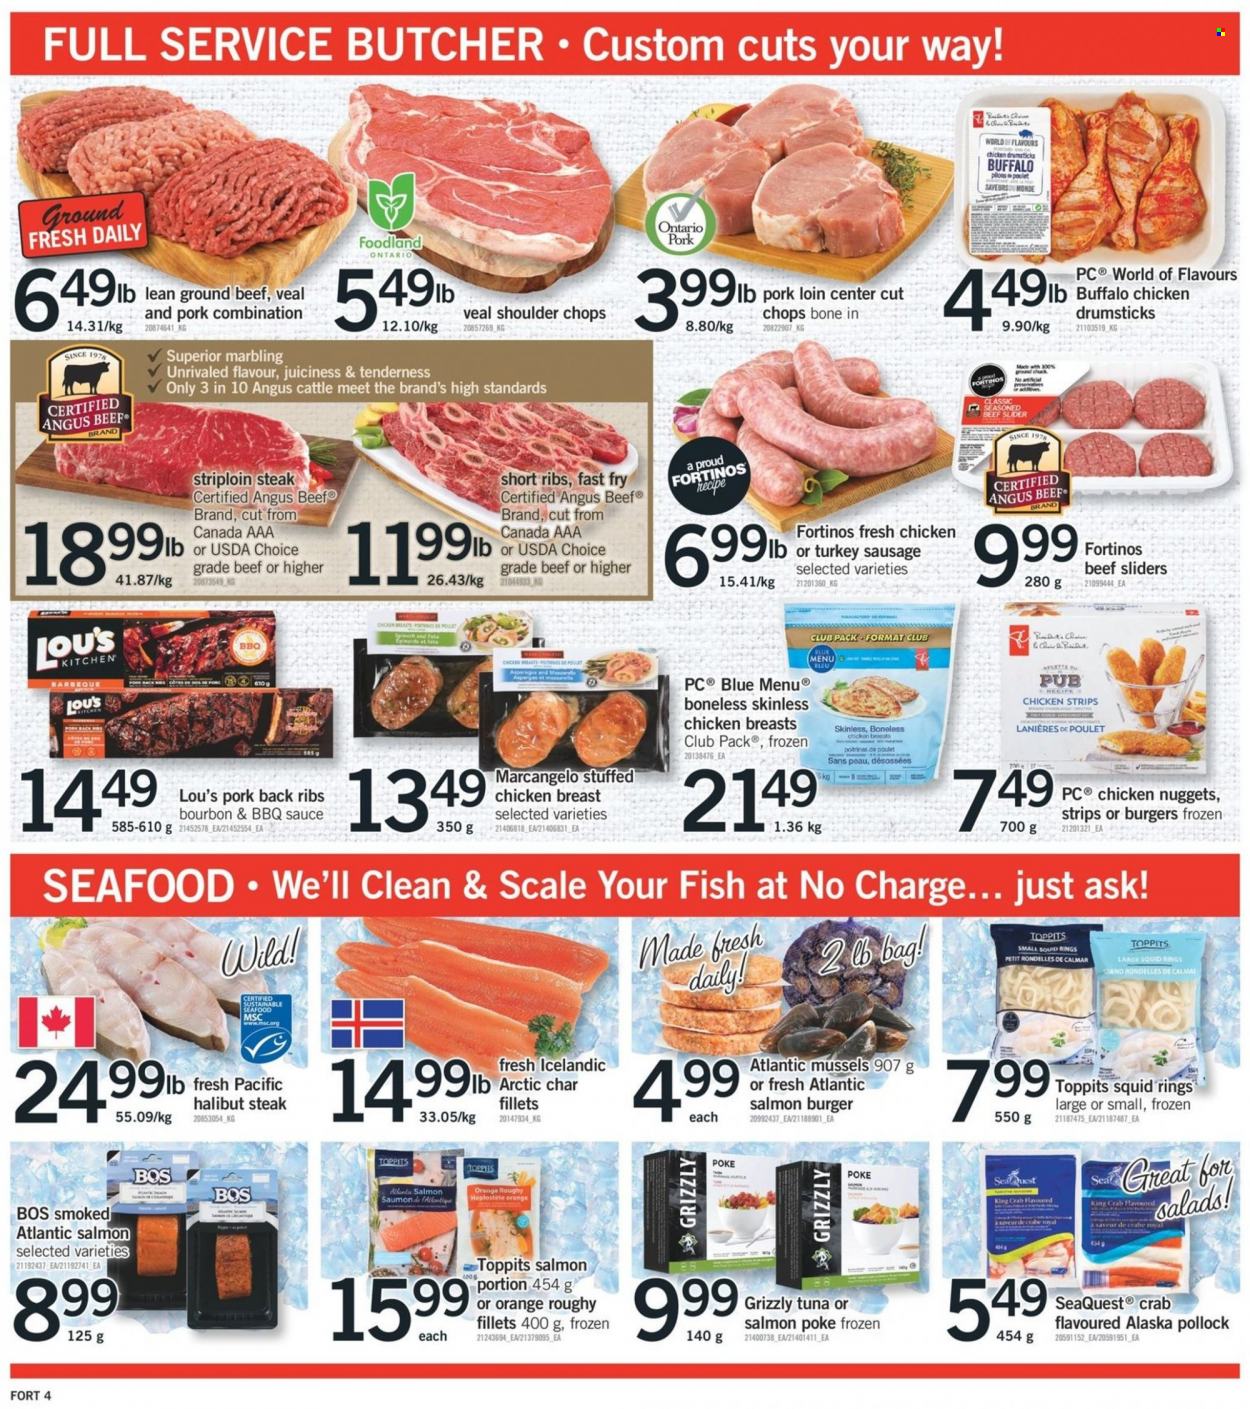 thumbnail - Fortinos Flyer - May 26, 2022 - June 01, 2022 - Sales products - scale, mussels, squid, tuna, halibut, king crab, pollock, crab, fish, squid rings, nuggets, sauce, chicken nuggets, stuffed chicken, sausage, feta, strips, chicken strips, BBQ sauce, chicken drumsticks, chicken, beef meat, ground beef, ground chuck, striploin steak, pork loin, pork meat, pork ribs, pork back ribs, BRAND'S, steak, oranges. Page 4.